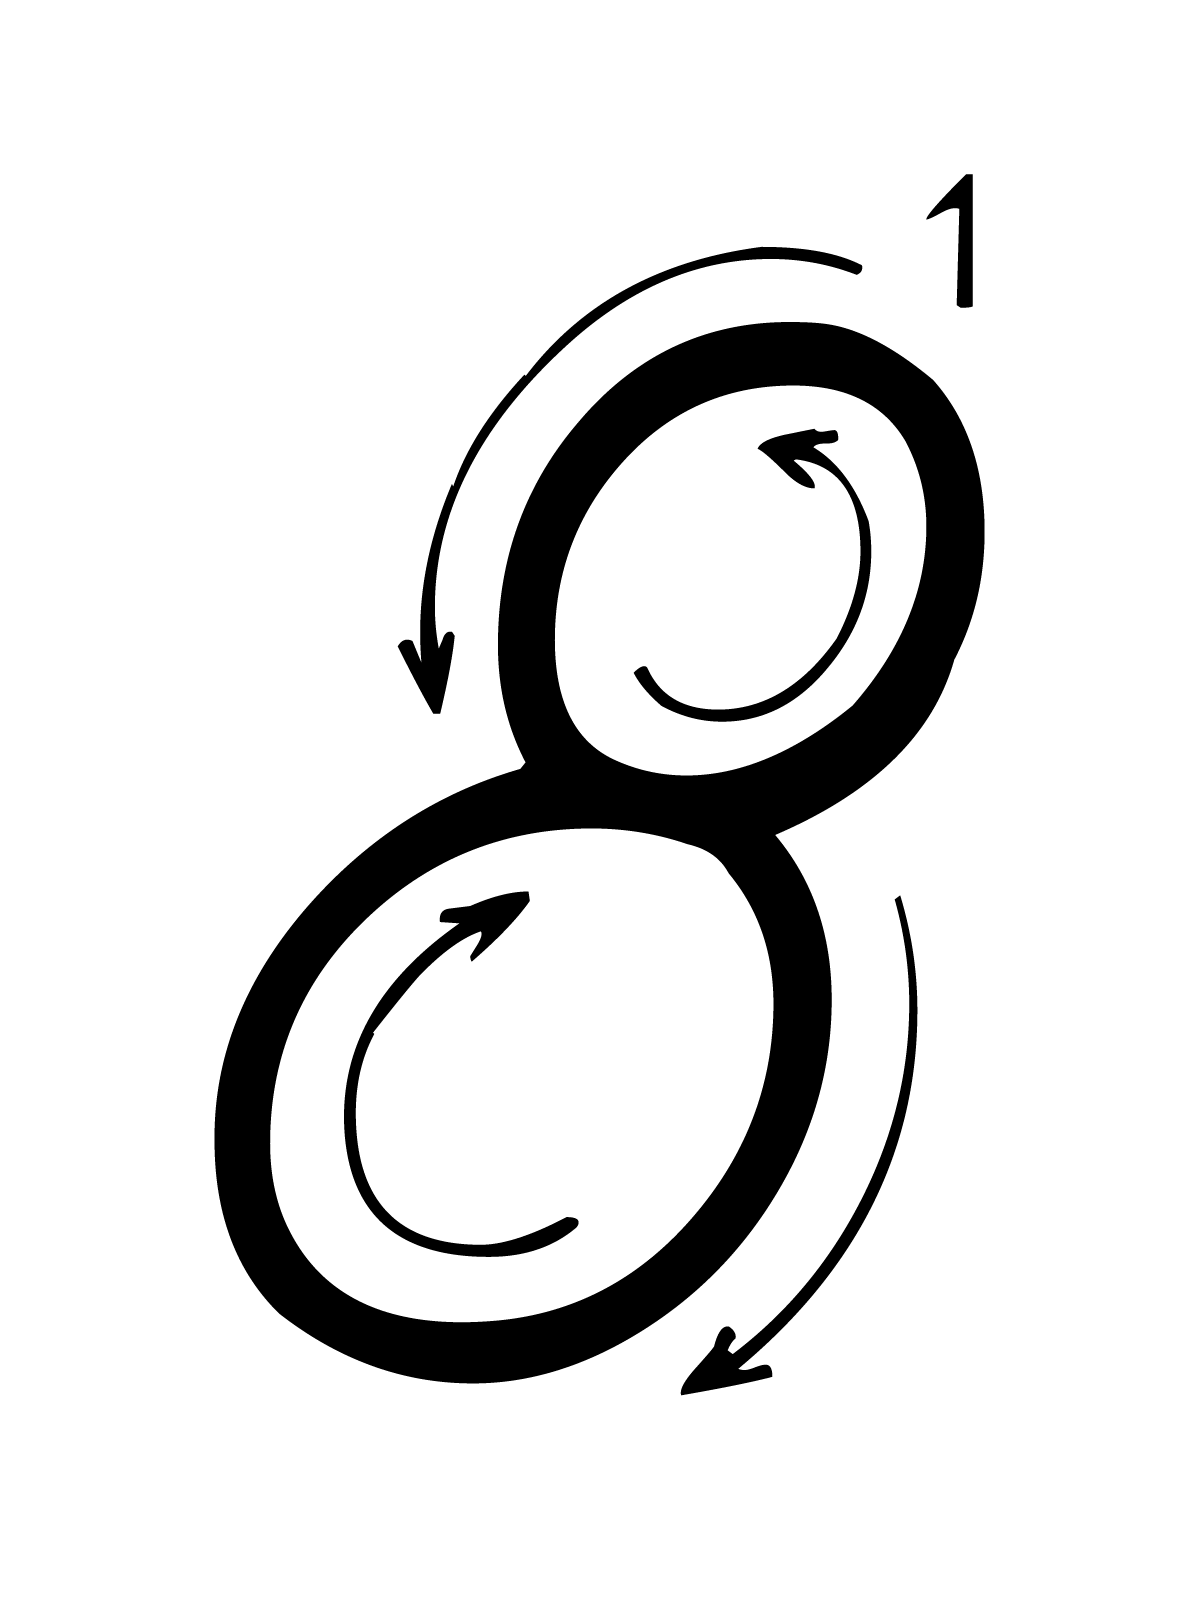 Letters and numbers - Number 8 (eight) with indications cursive movement